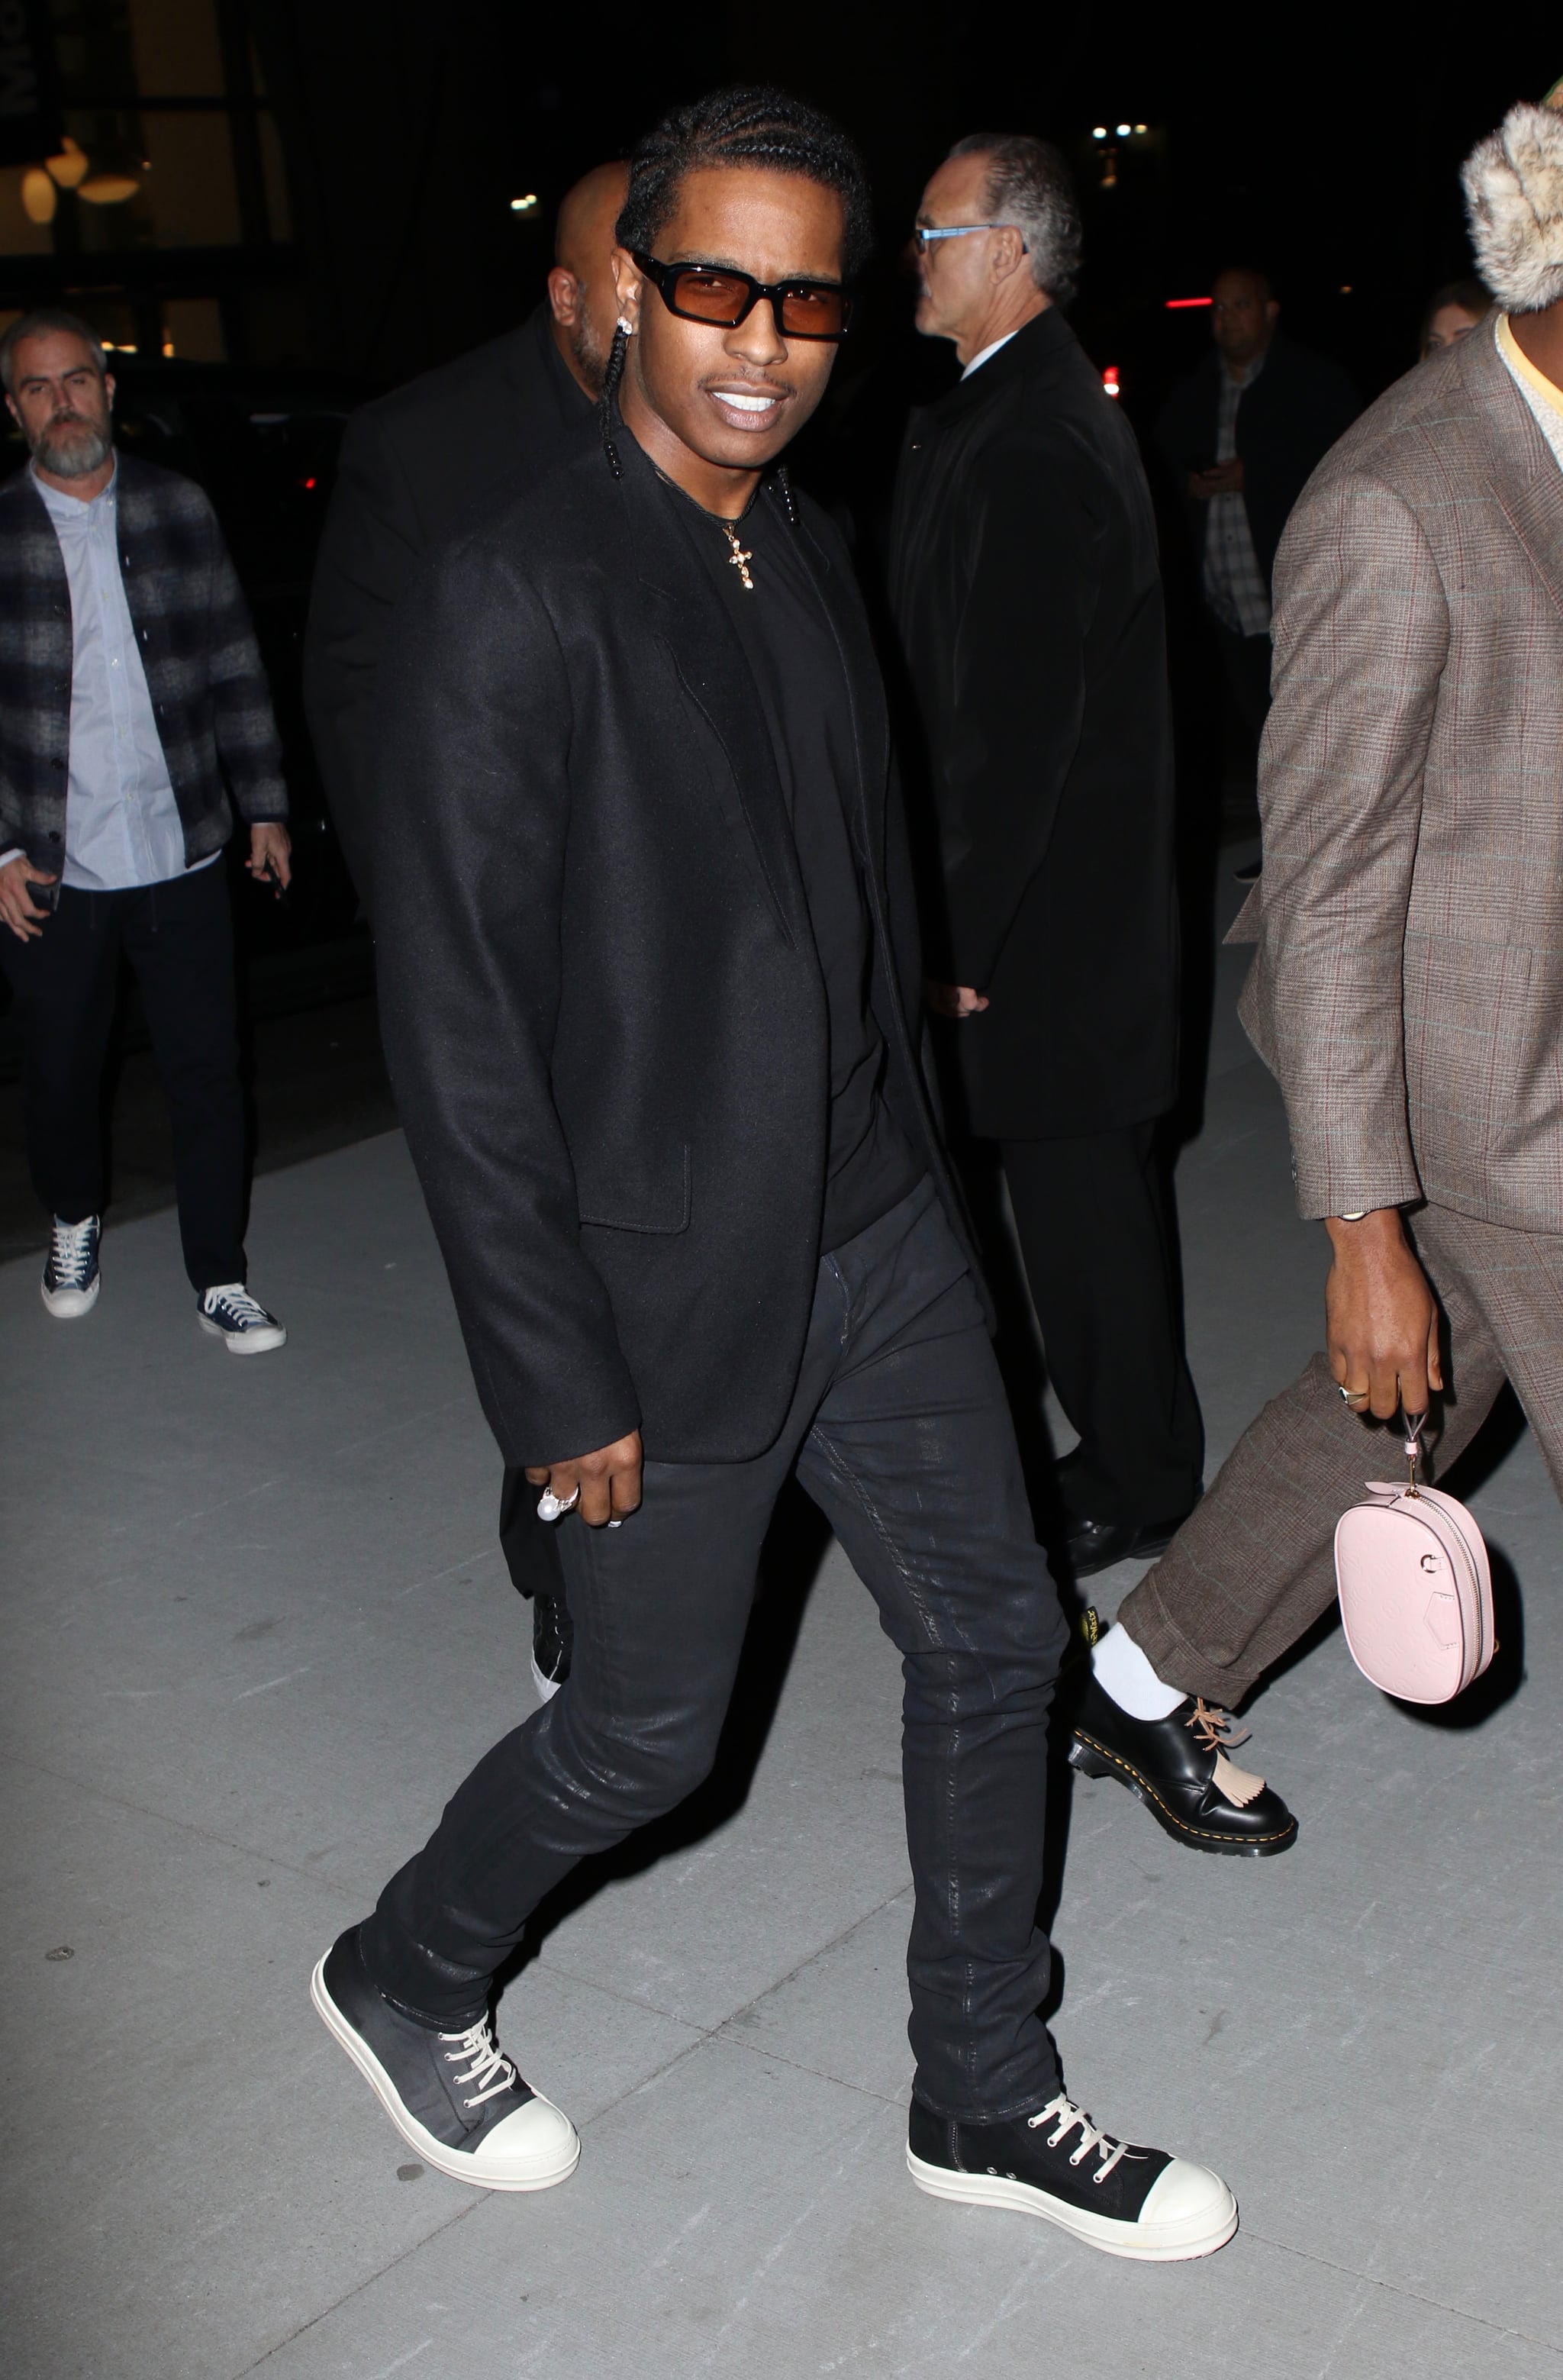 UpscaleHype - ASAP Rocky Wears Berluti Suit and Dior Homme Sneakers at the  Diamond Ball  -wears-berluti-suit-and-dior-homme-sneakers-at-the-diamond-ball/ -  UpscaleHype